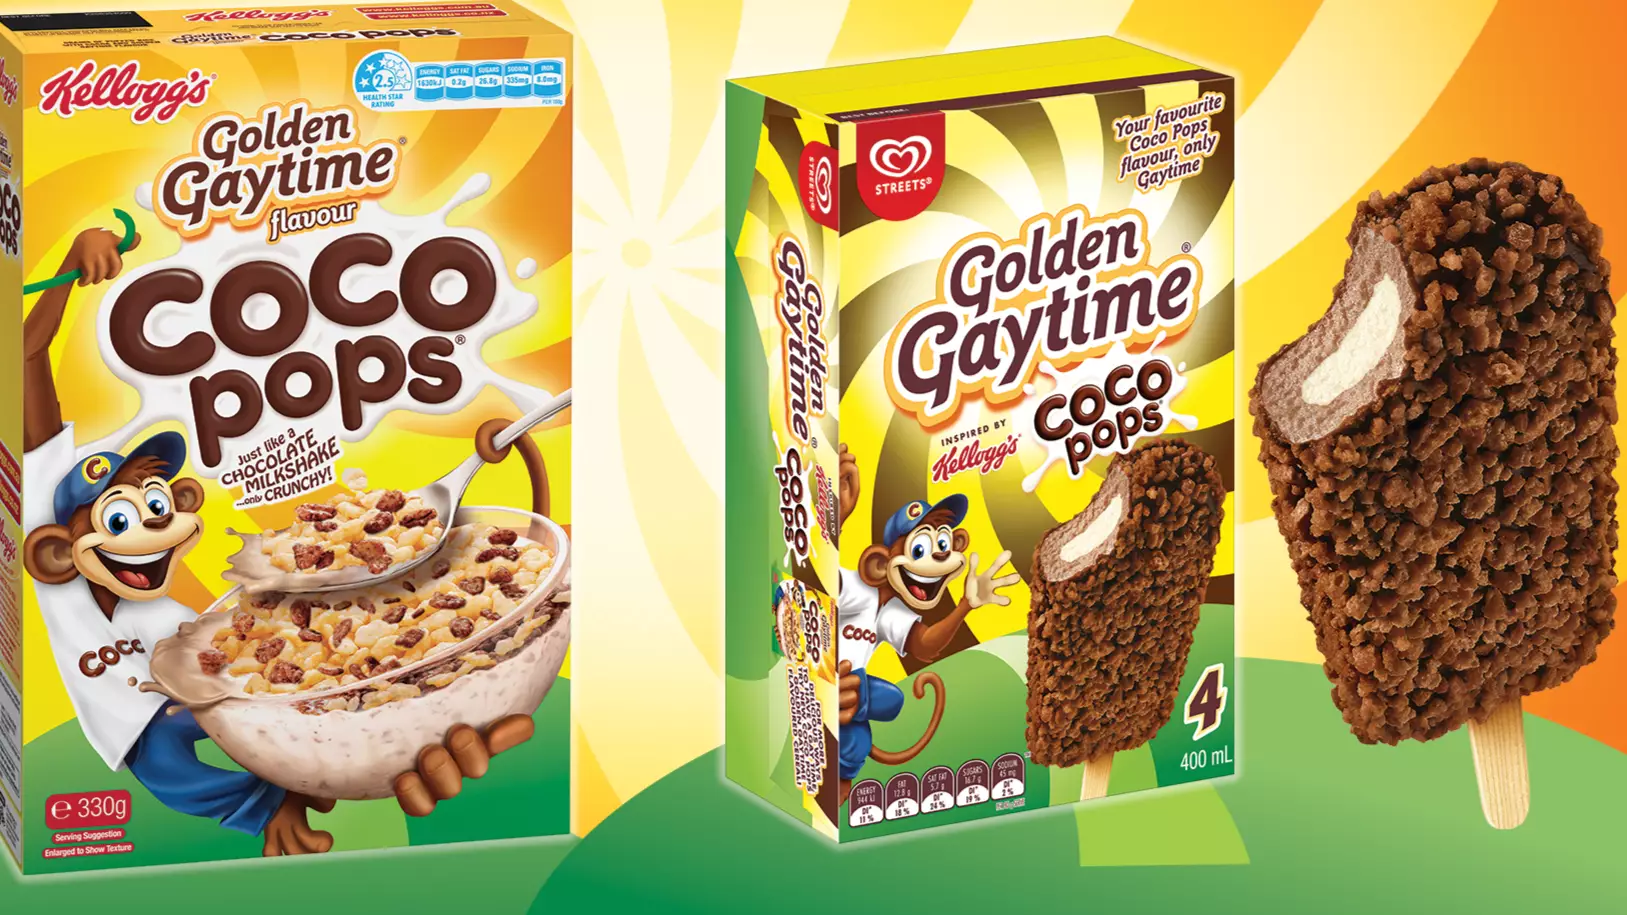 Golden Gaytime Team Up With Coco Pops To Create Honeycomb Cereal And Chocolate Ice Cream